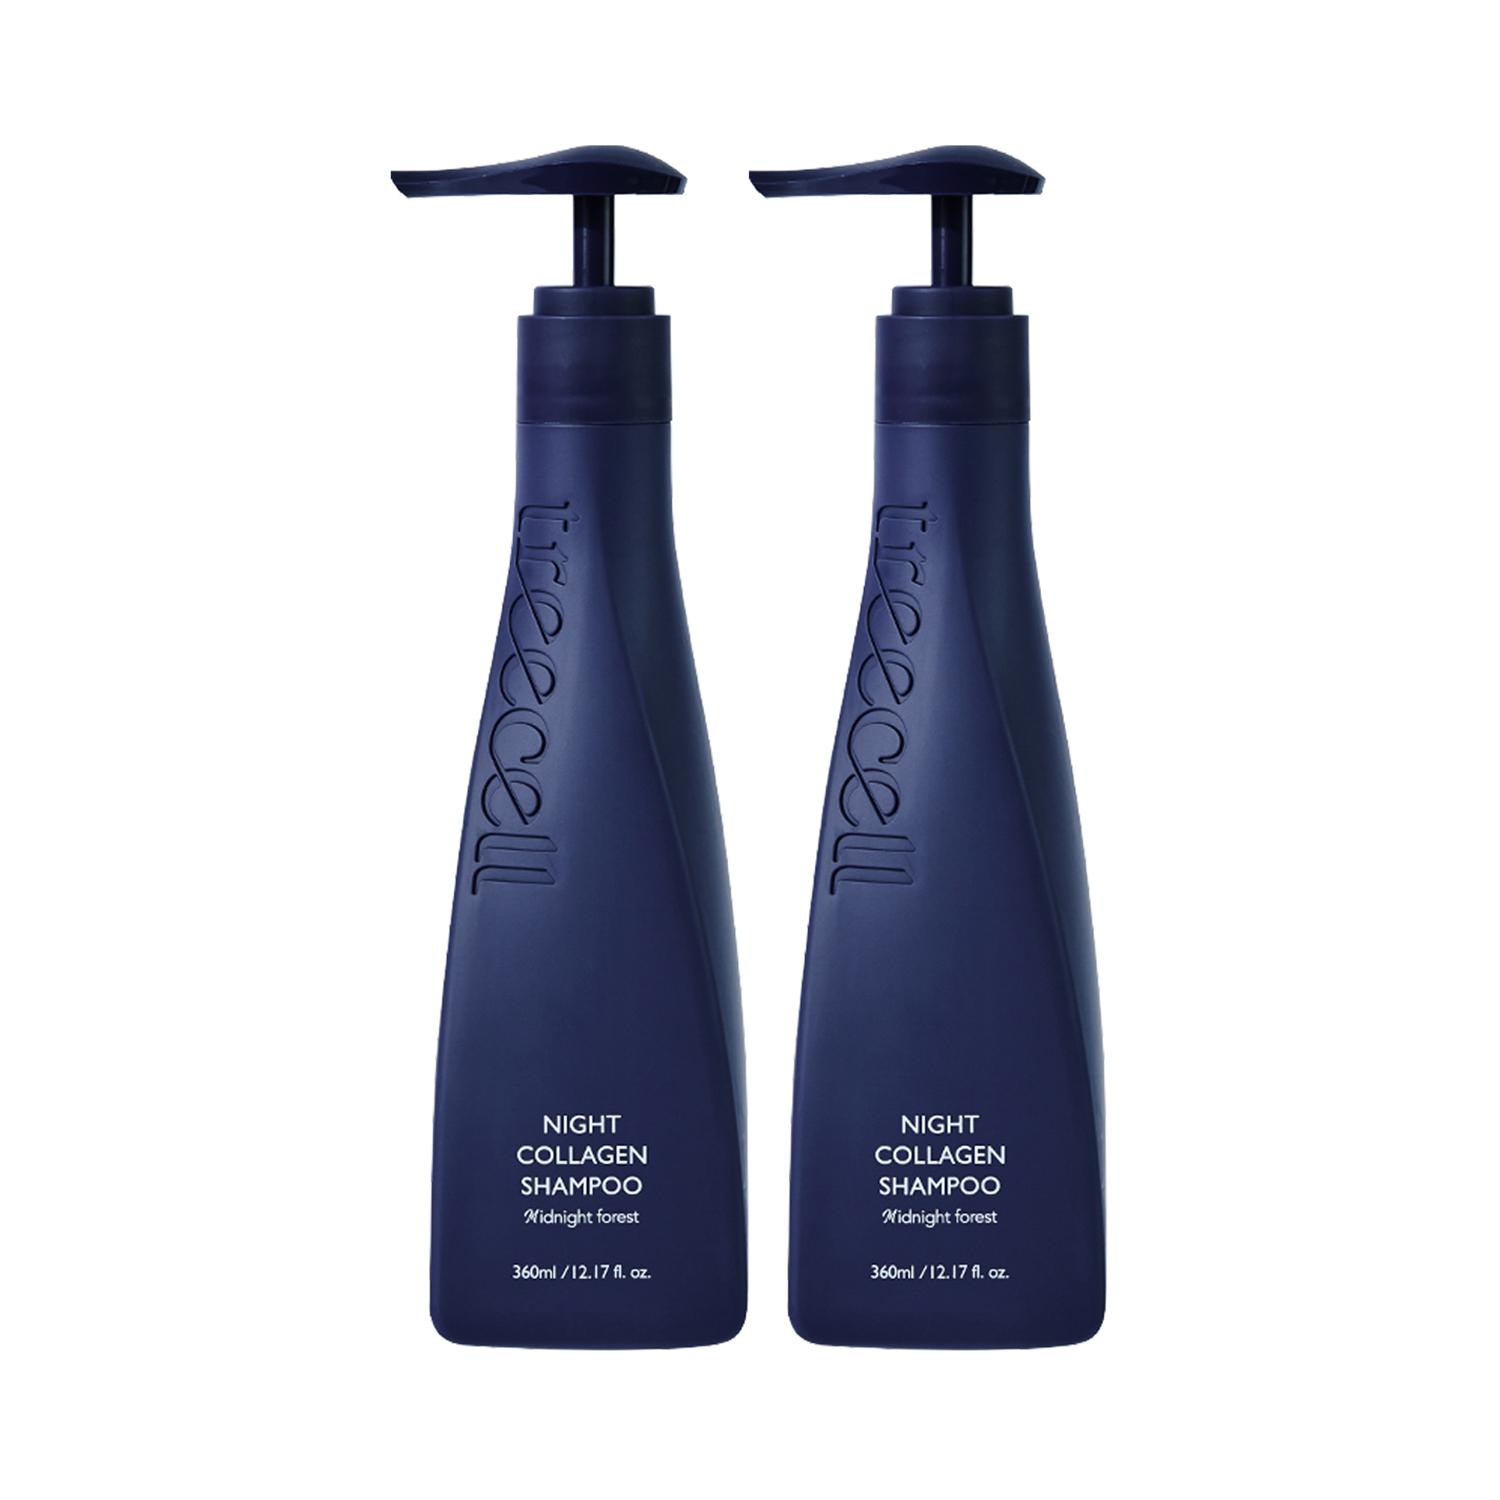 Treecell | Treecell Night Collagen Shampoo Midnight Forest Pack of 2 Combo